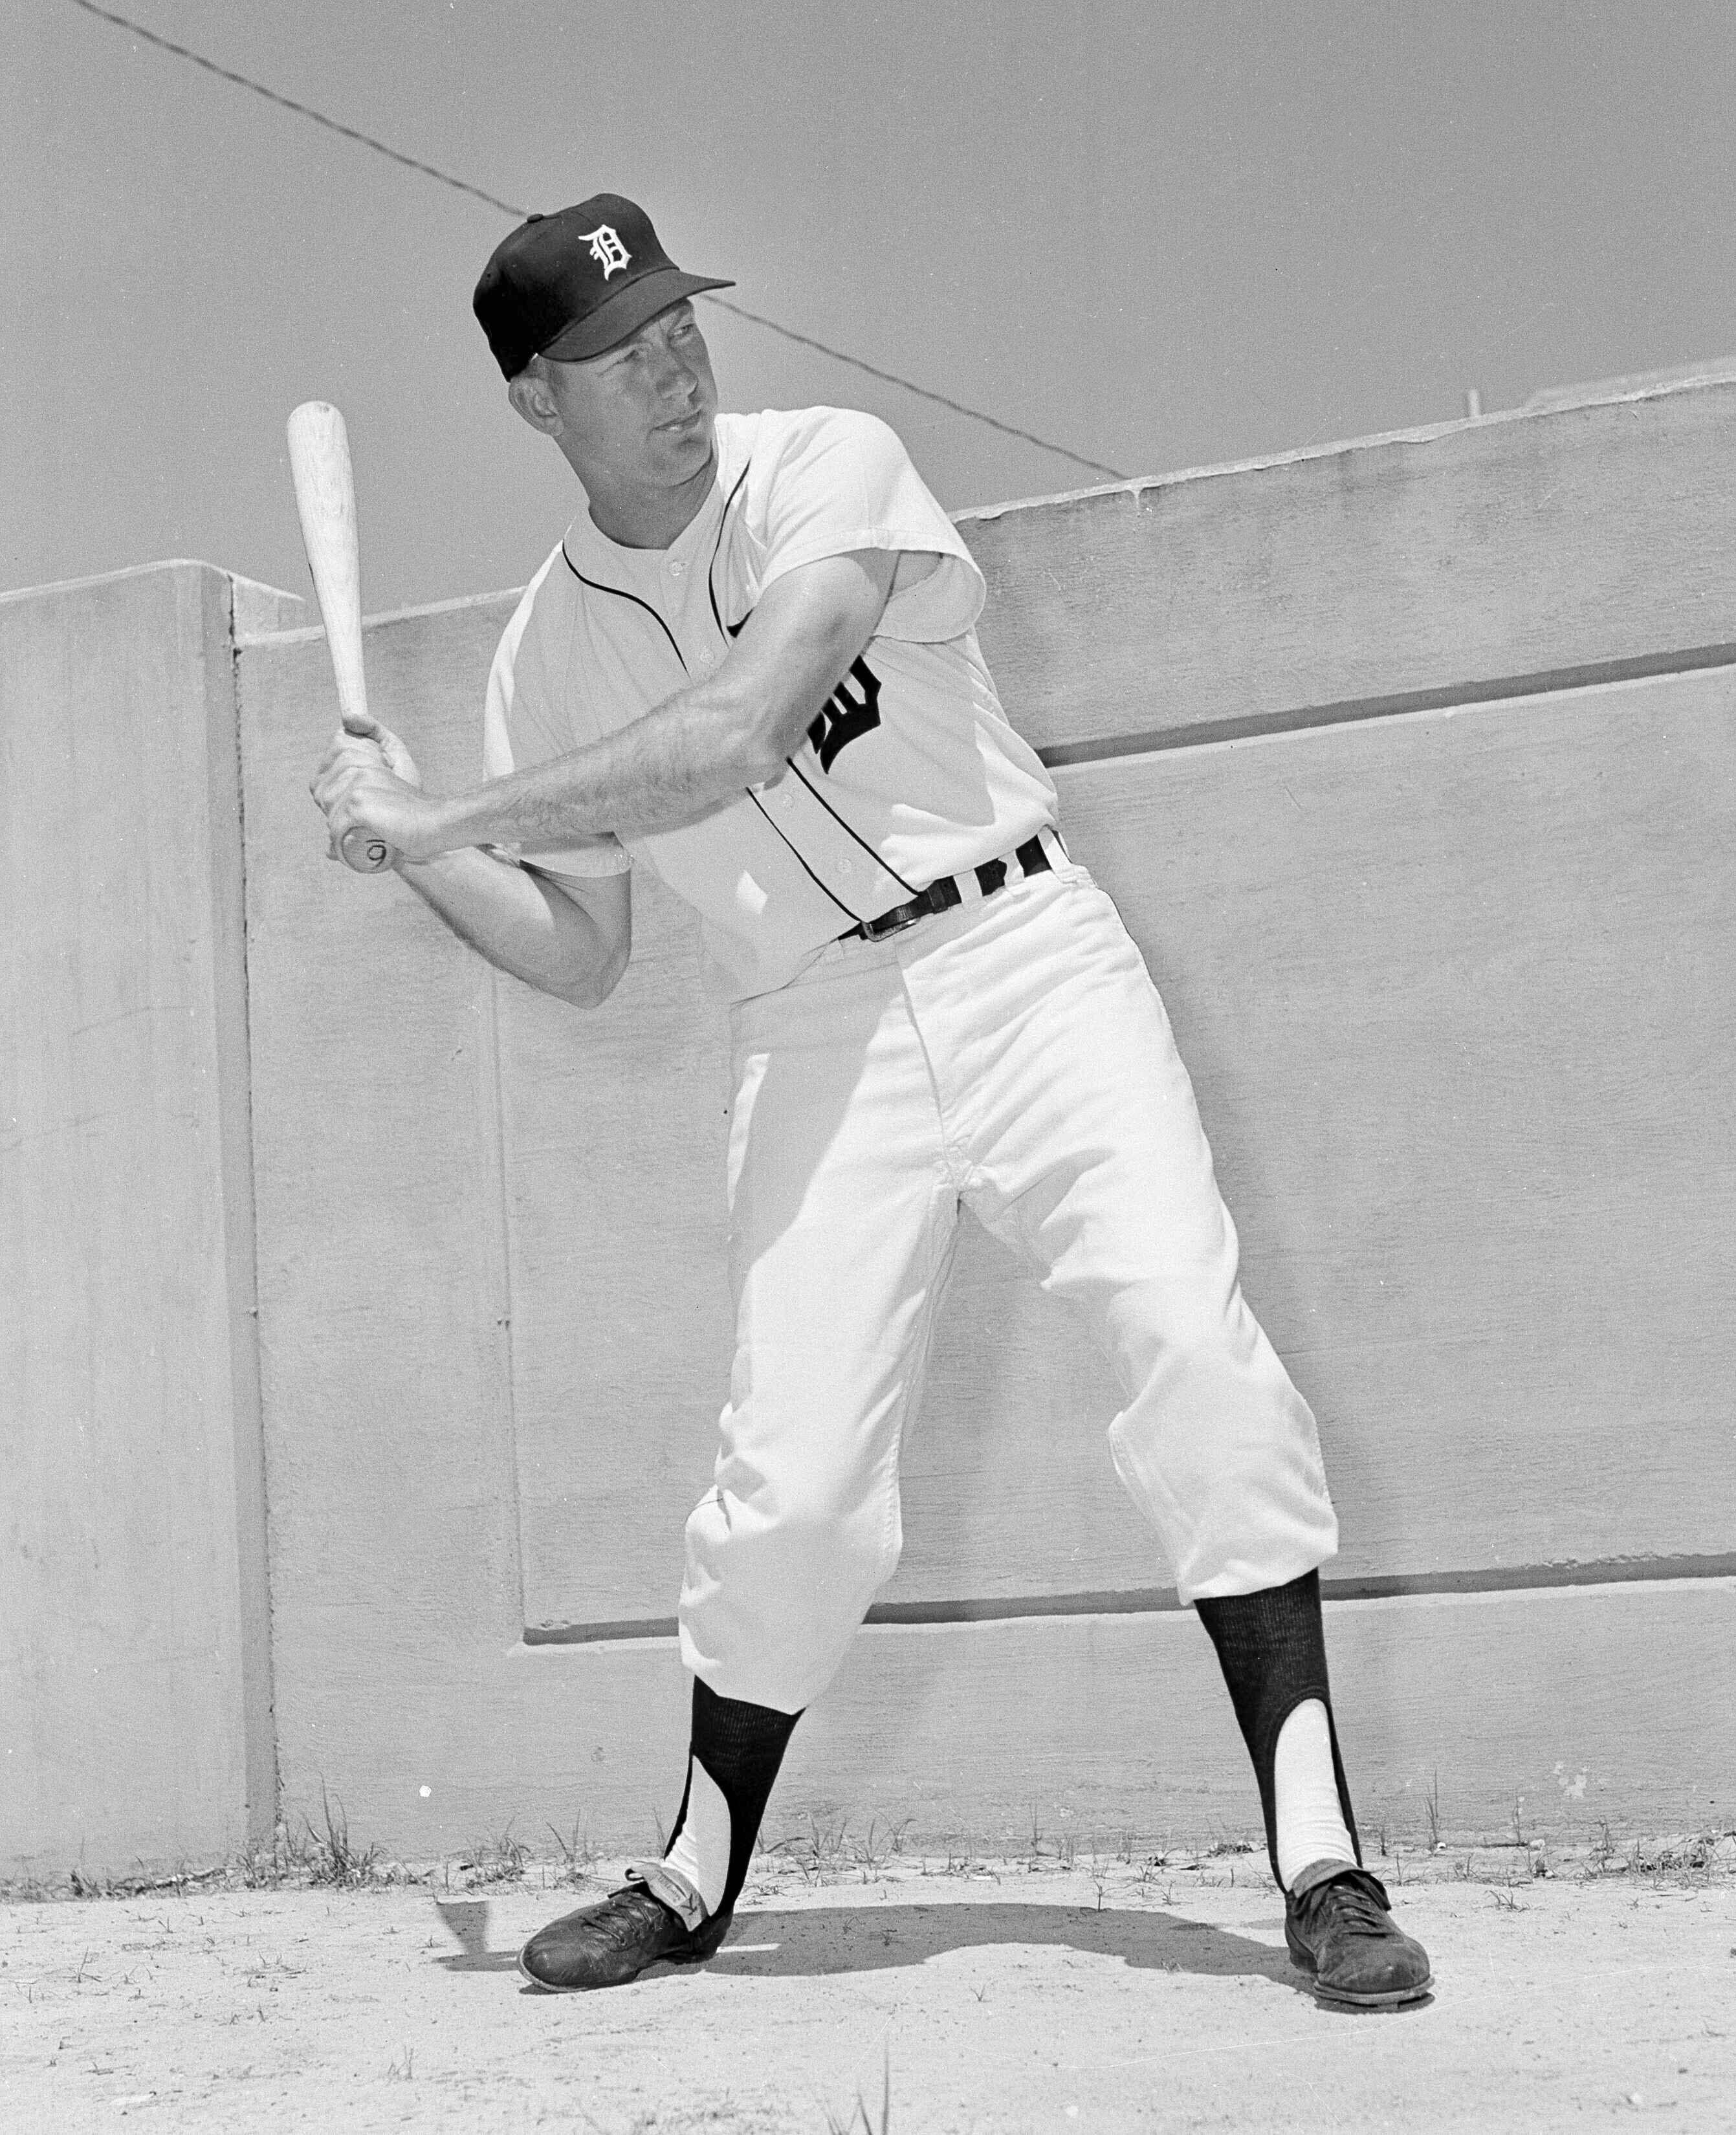 Al Kaline, outfielder of the Detroit Tigers is pictured in batting action, April 1963.